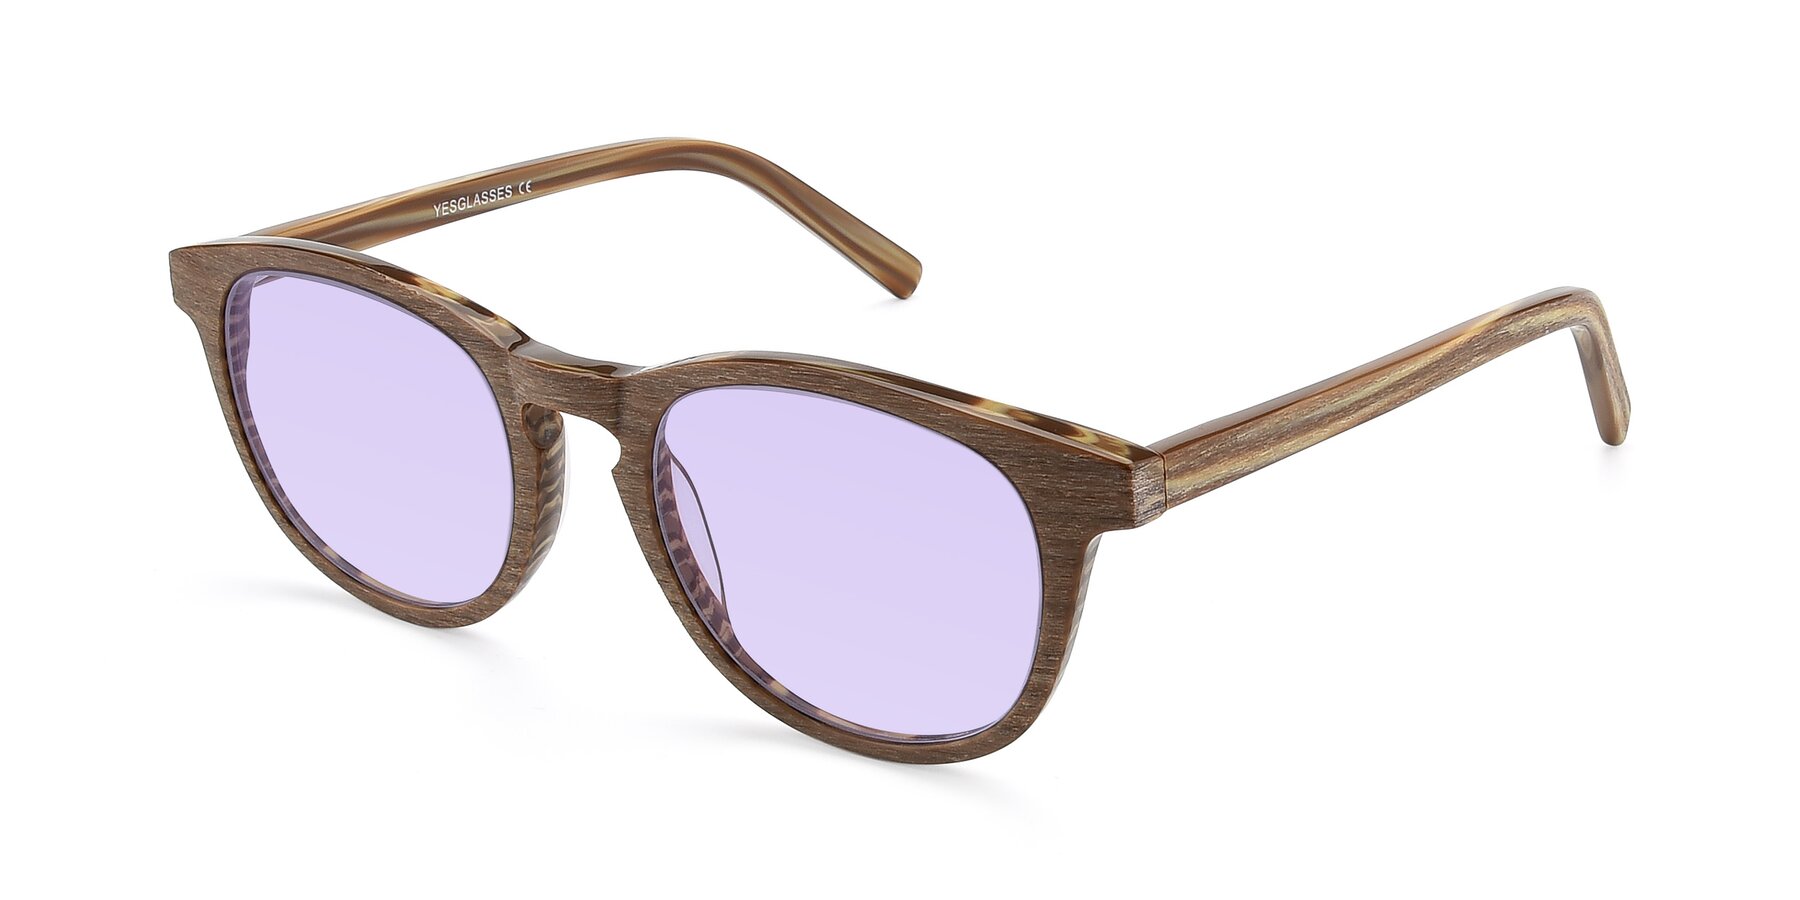 Angle of SR6044 in Brown-Wooden with Light Purple Tinted Lenses